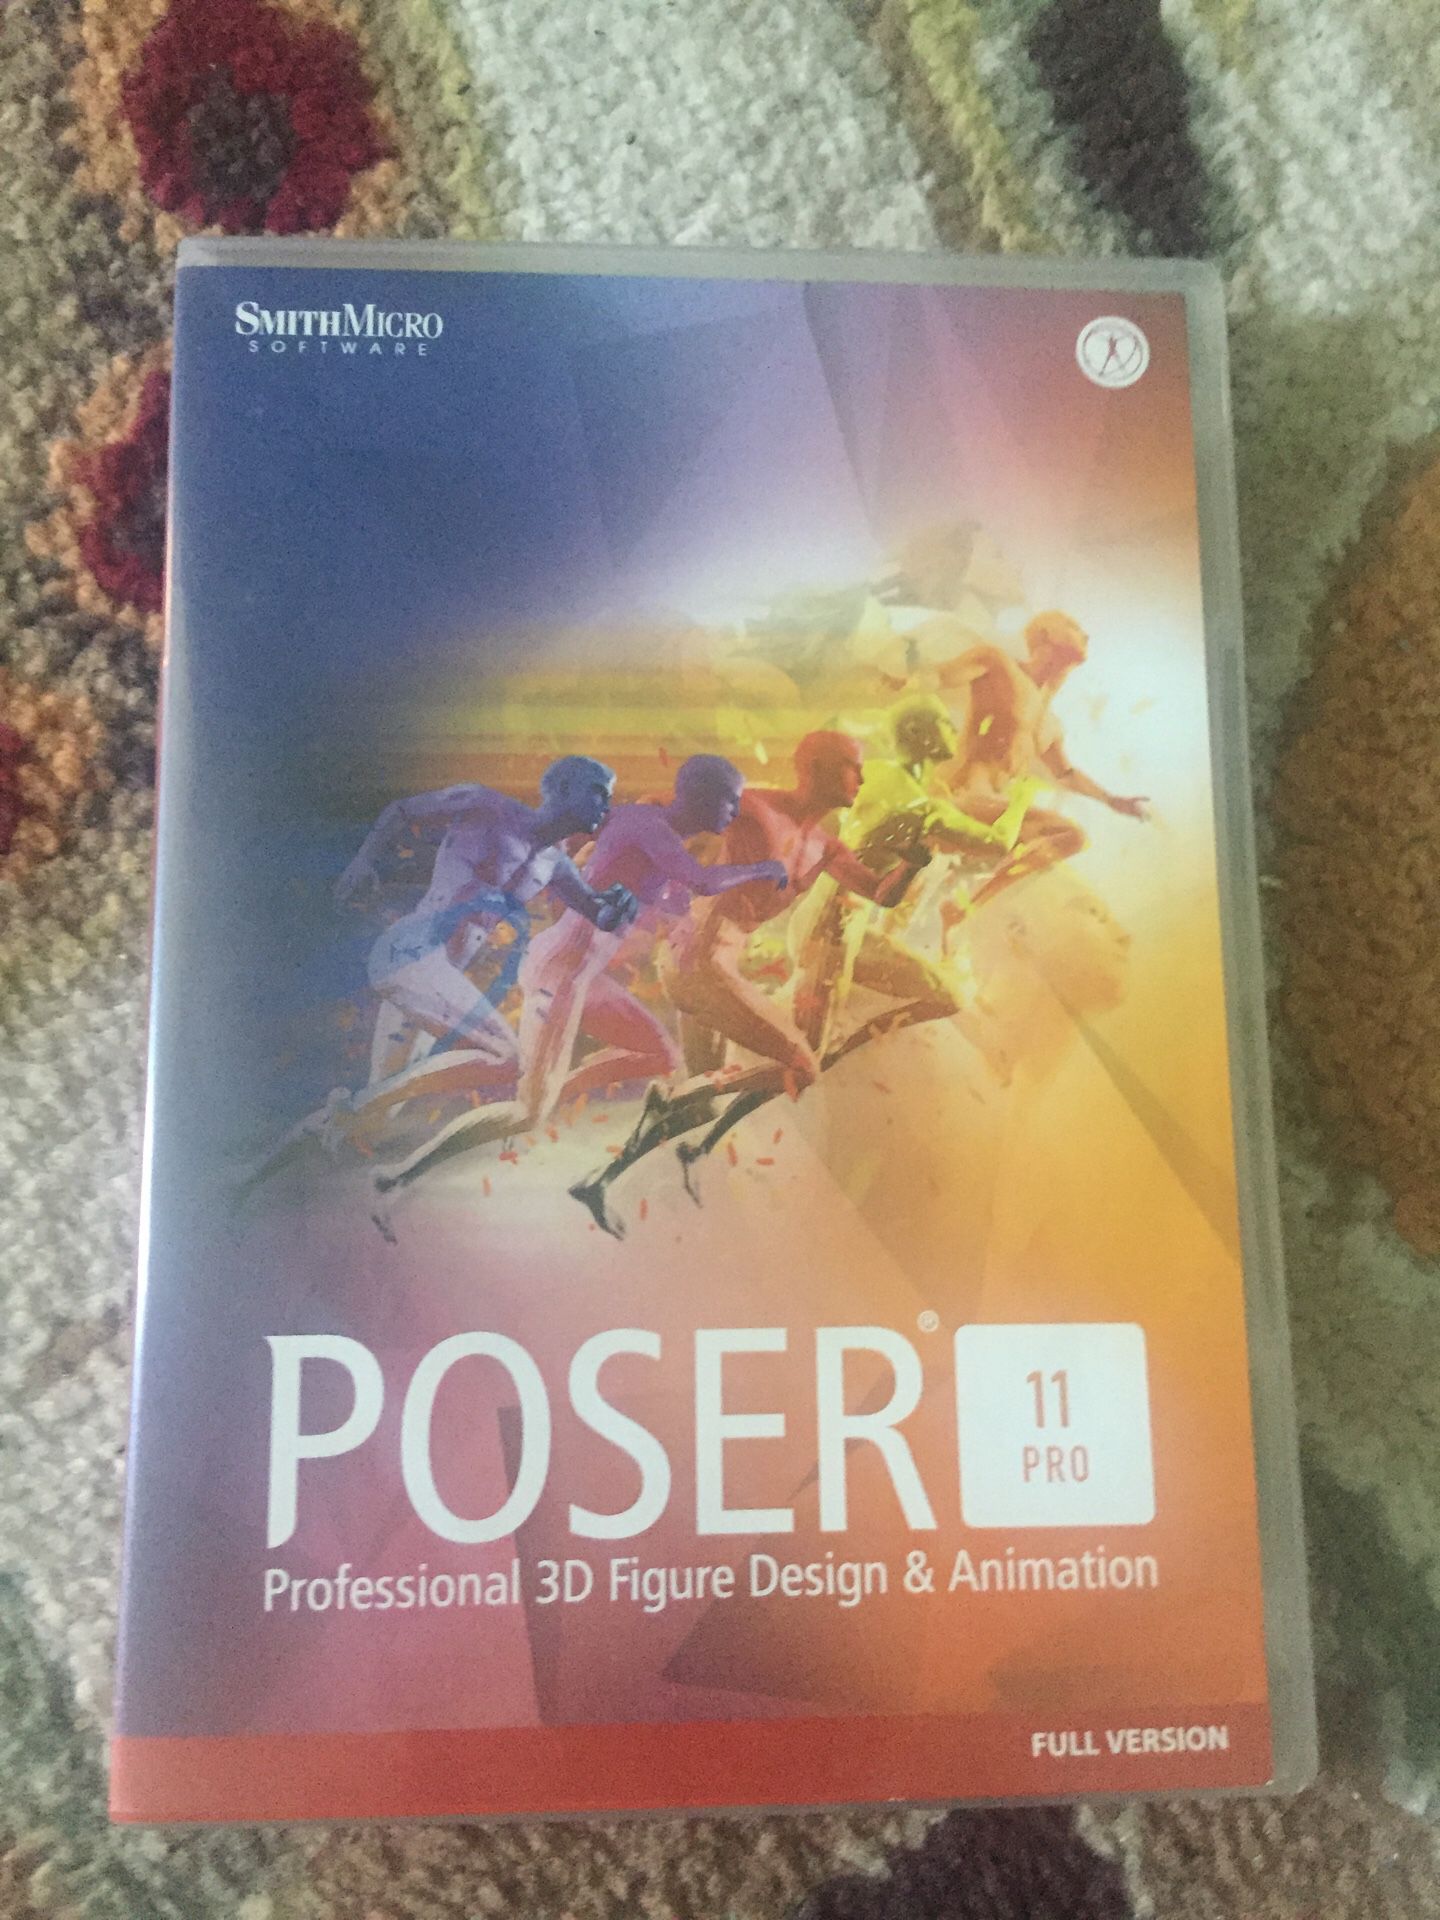 Poser Pro 11 for Windows and Mac OS Full Version